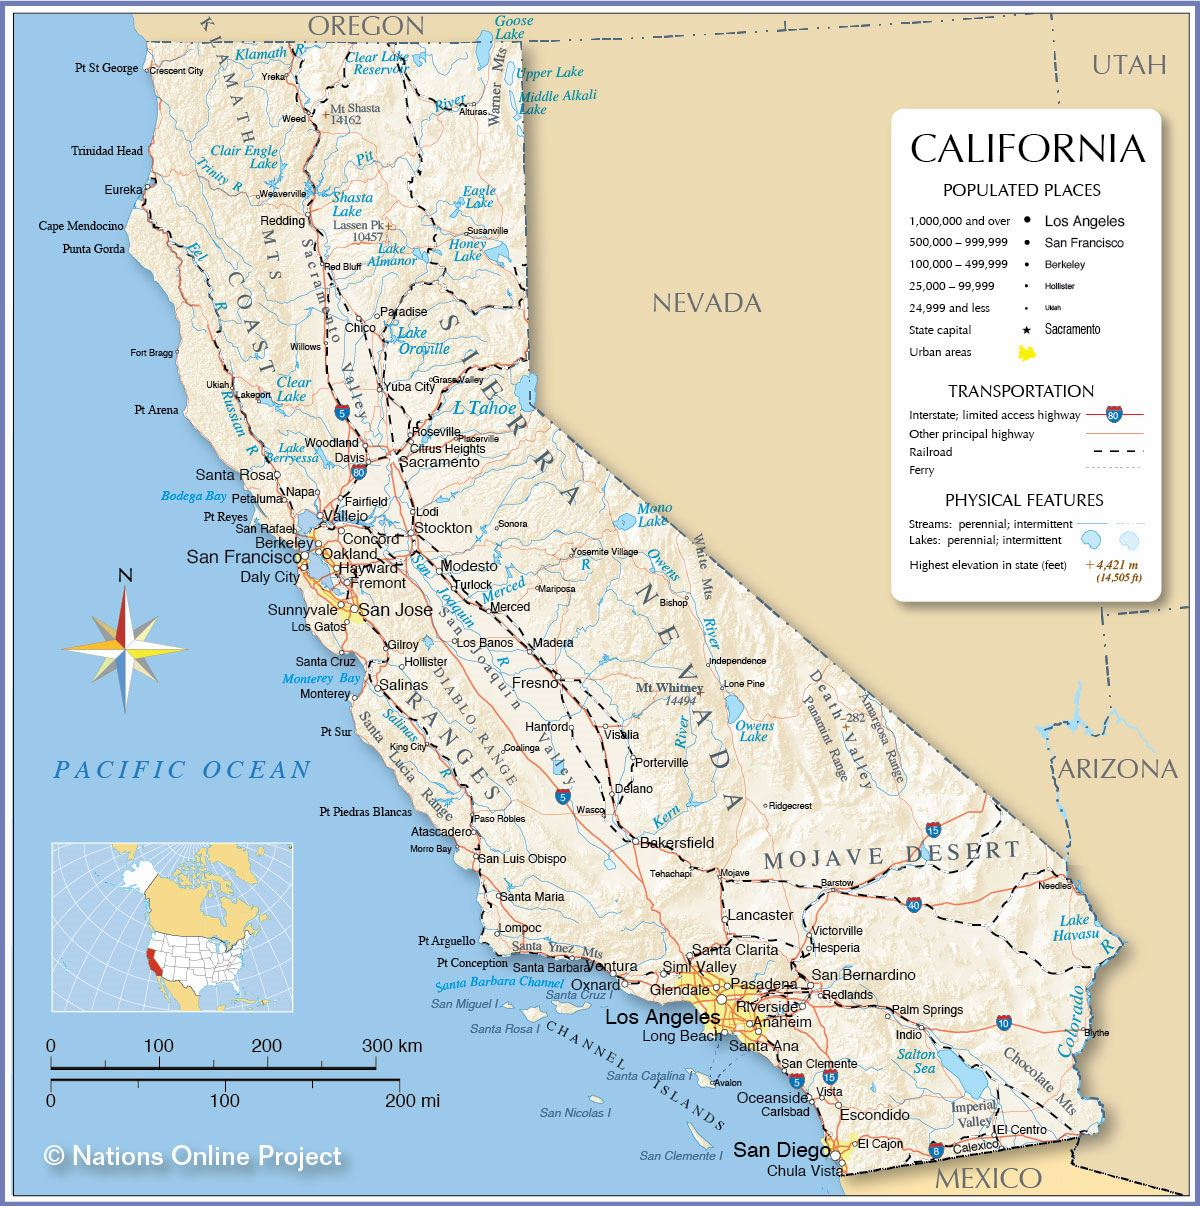 Large California Maps For Free Download And Print | High-Resolution - Map Of California